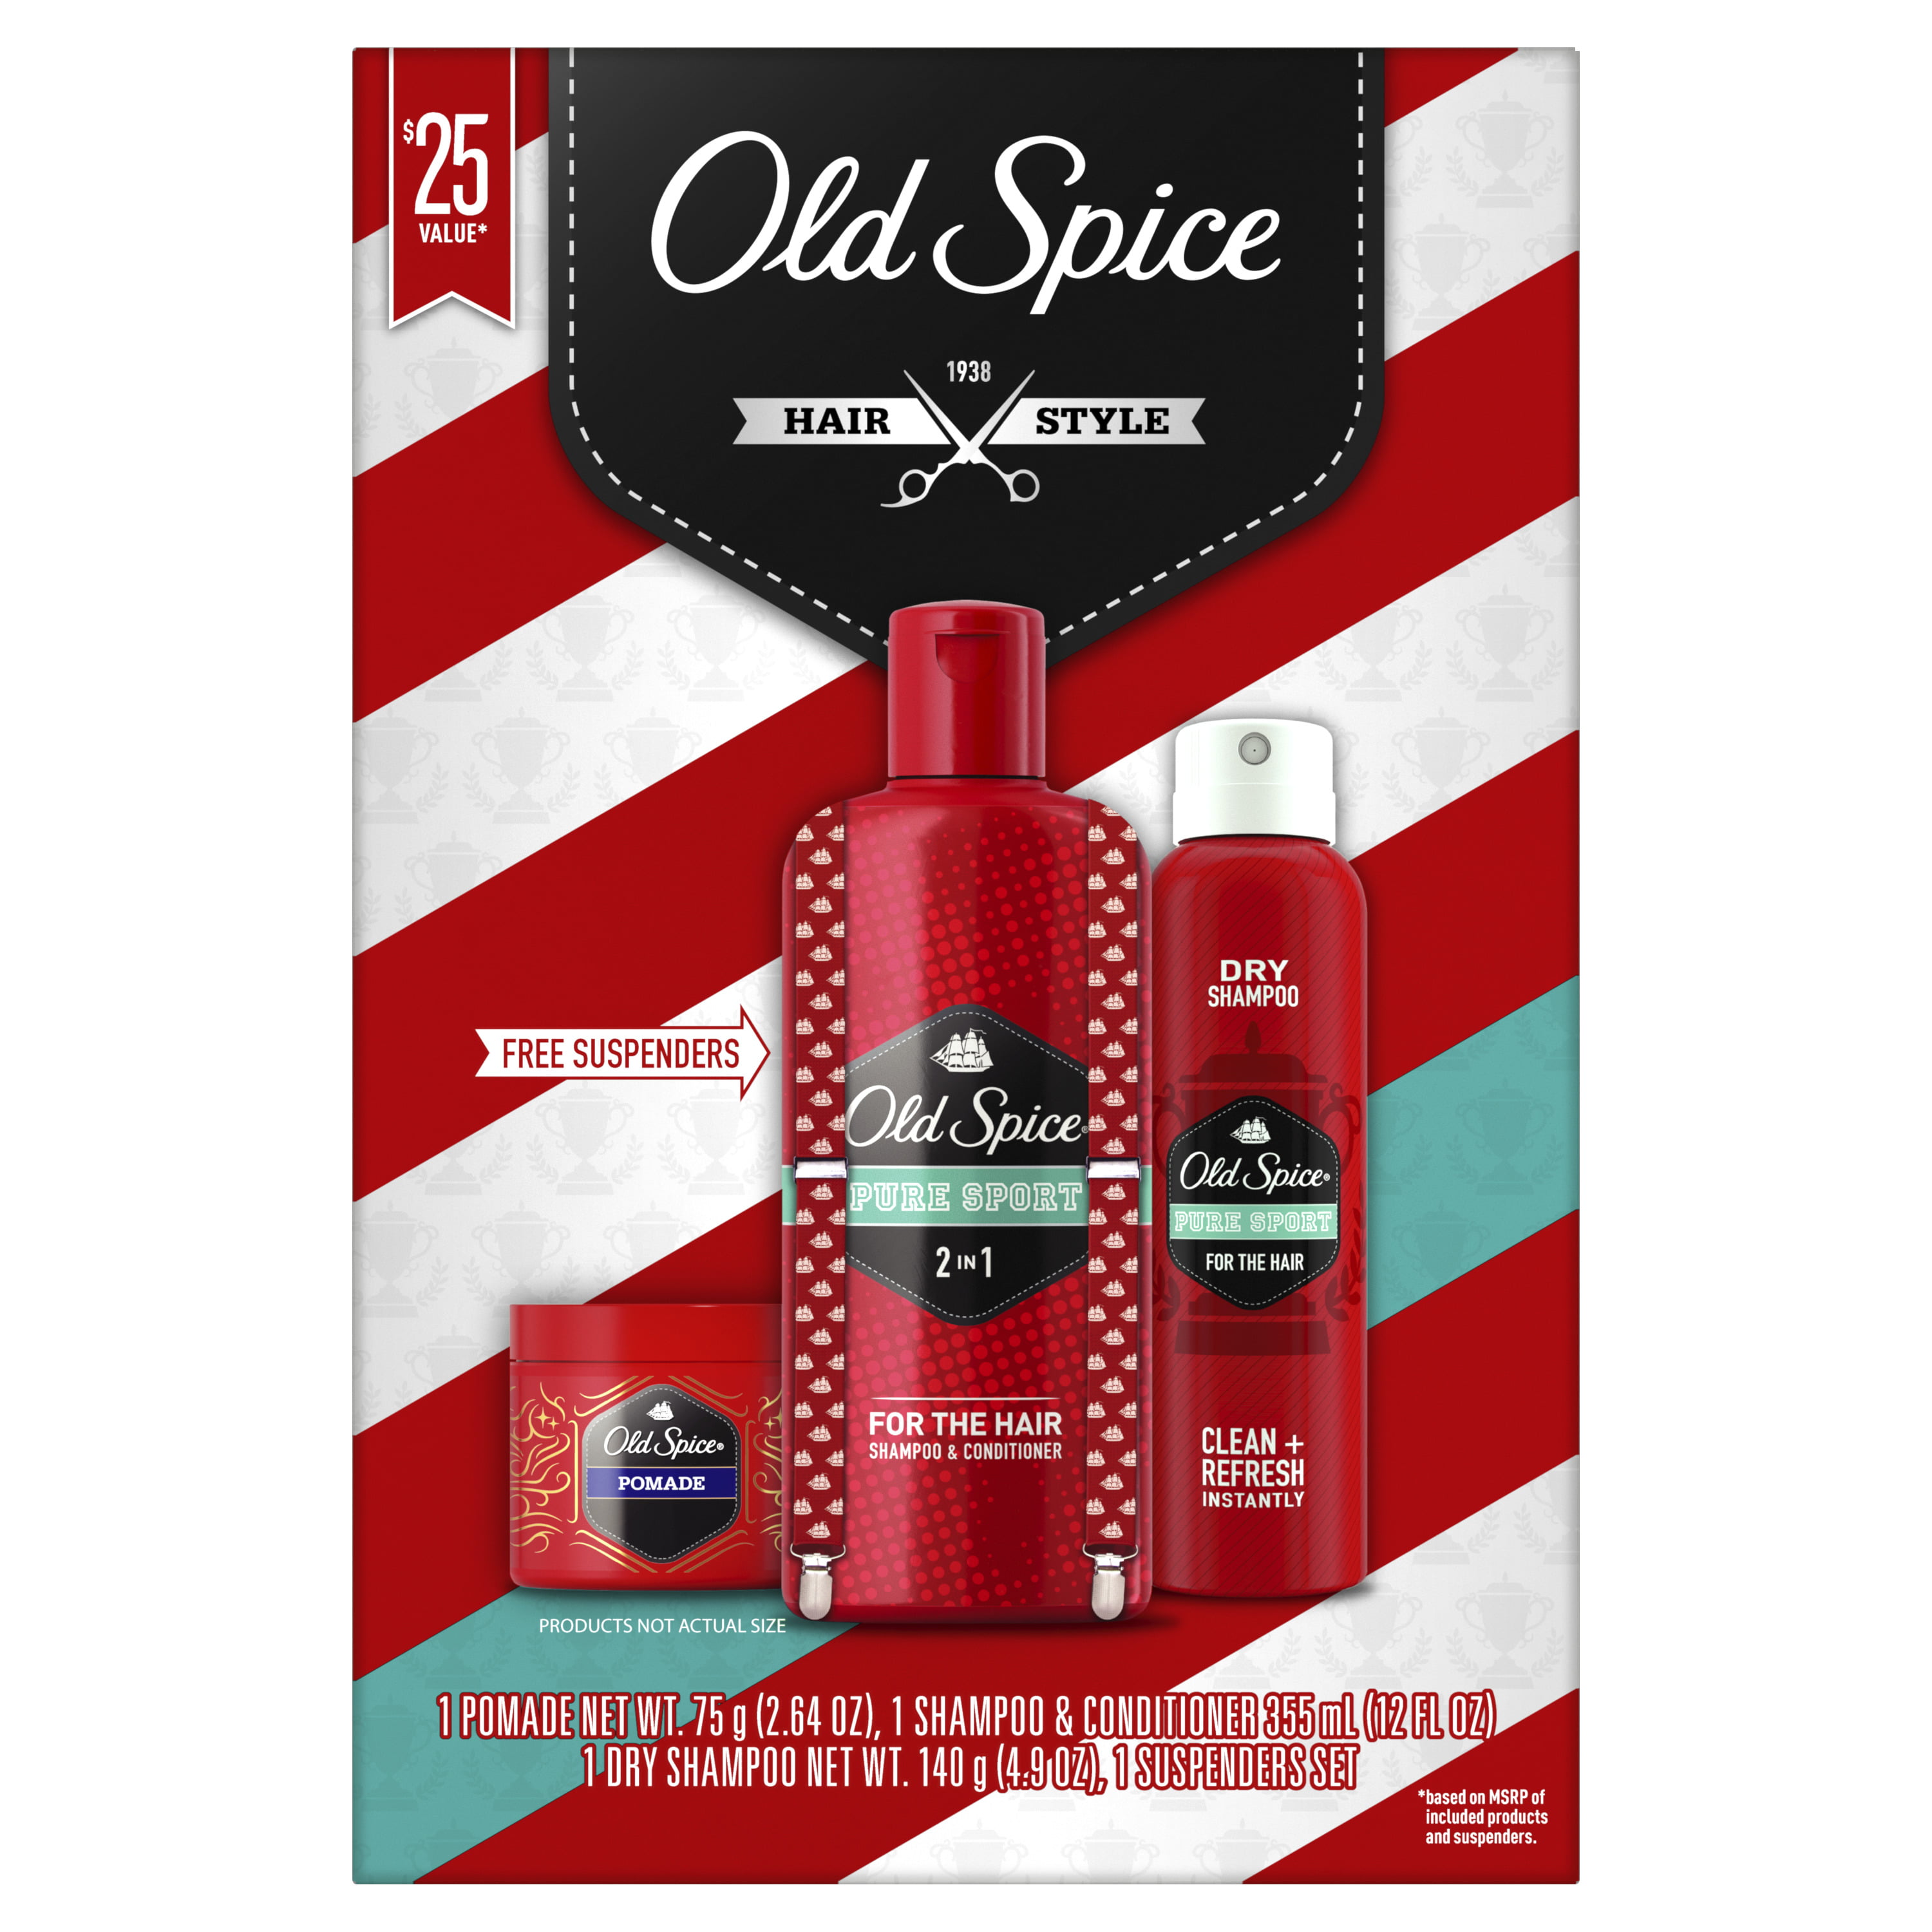 25 Value) Old Spice Hair Style Pure Sport 4-Piece Holiday Set, 2 in 1  Shampoo and Conditioner, Dry Shampoo, Hair Pomade and Suspenders -  